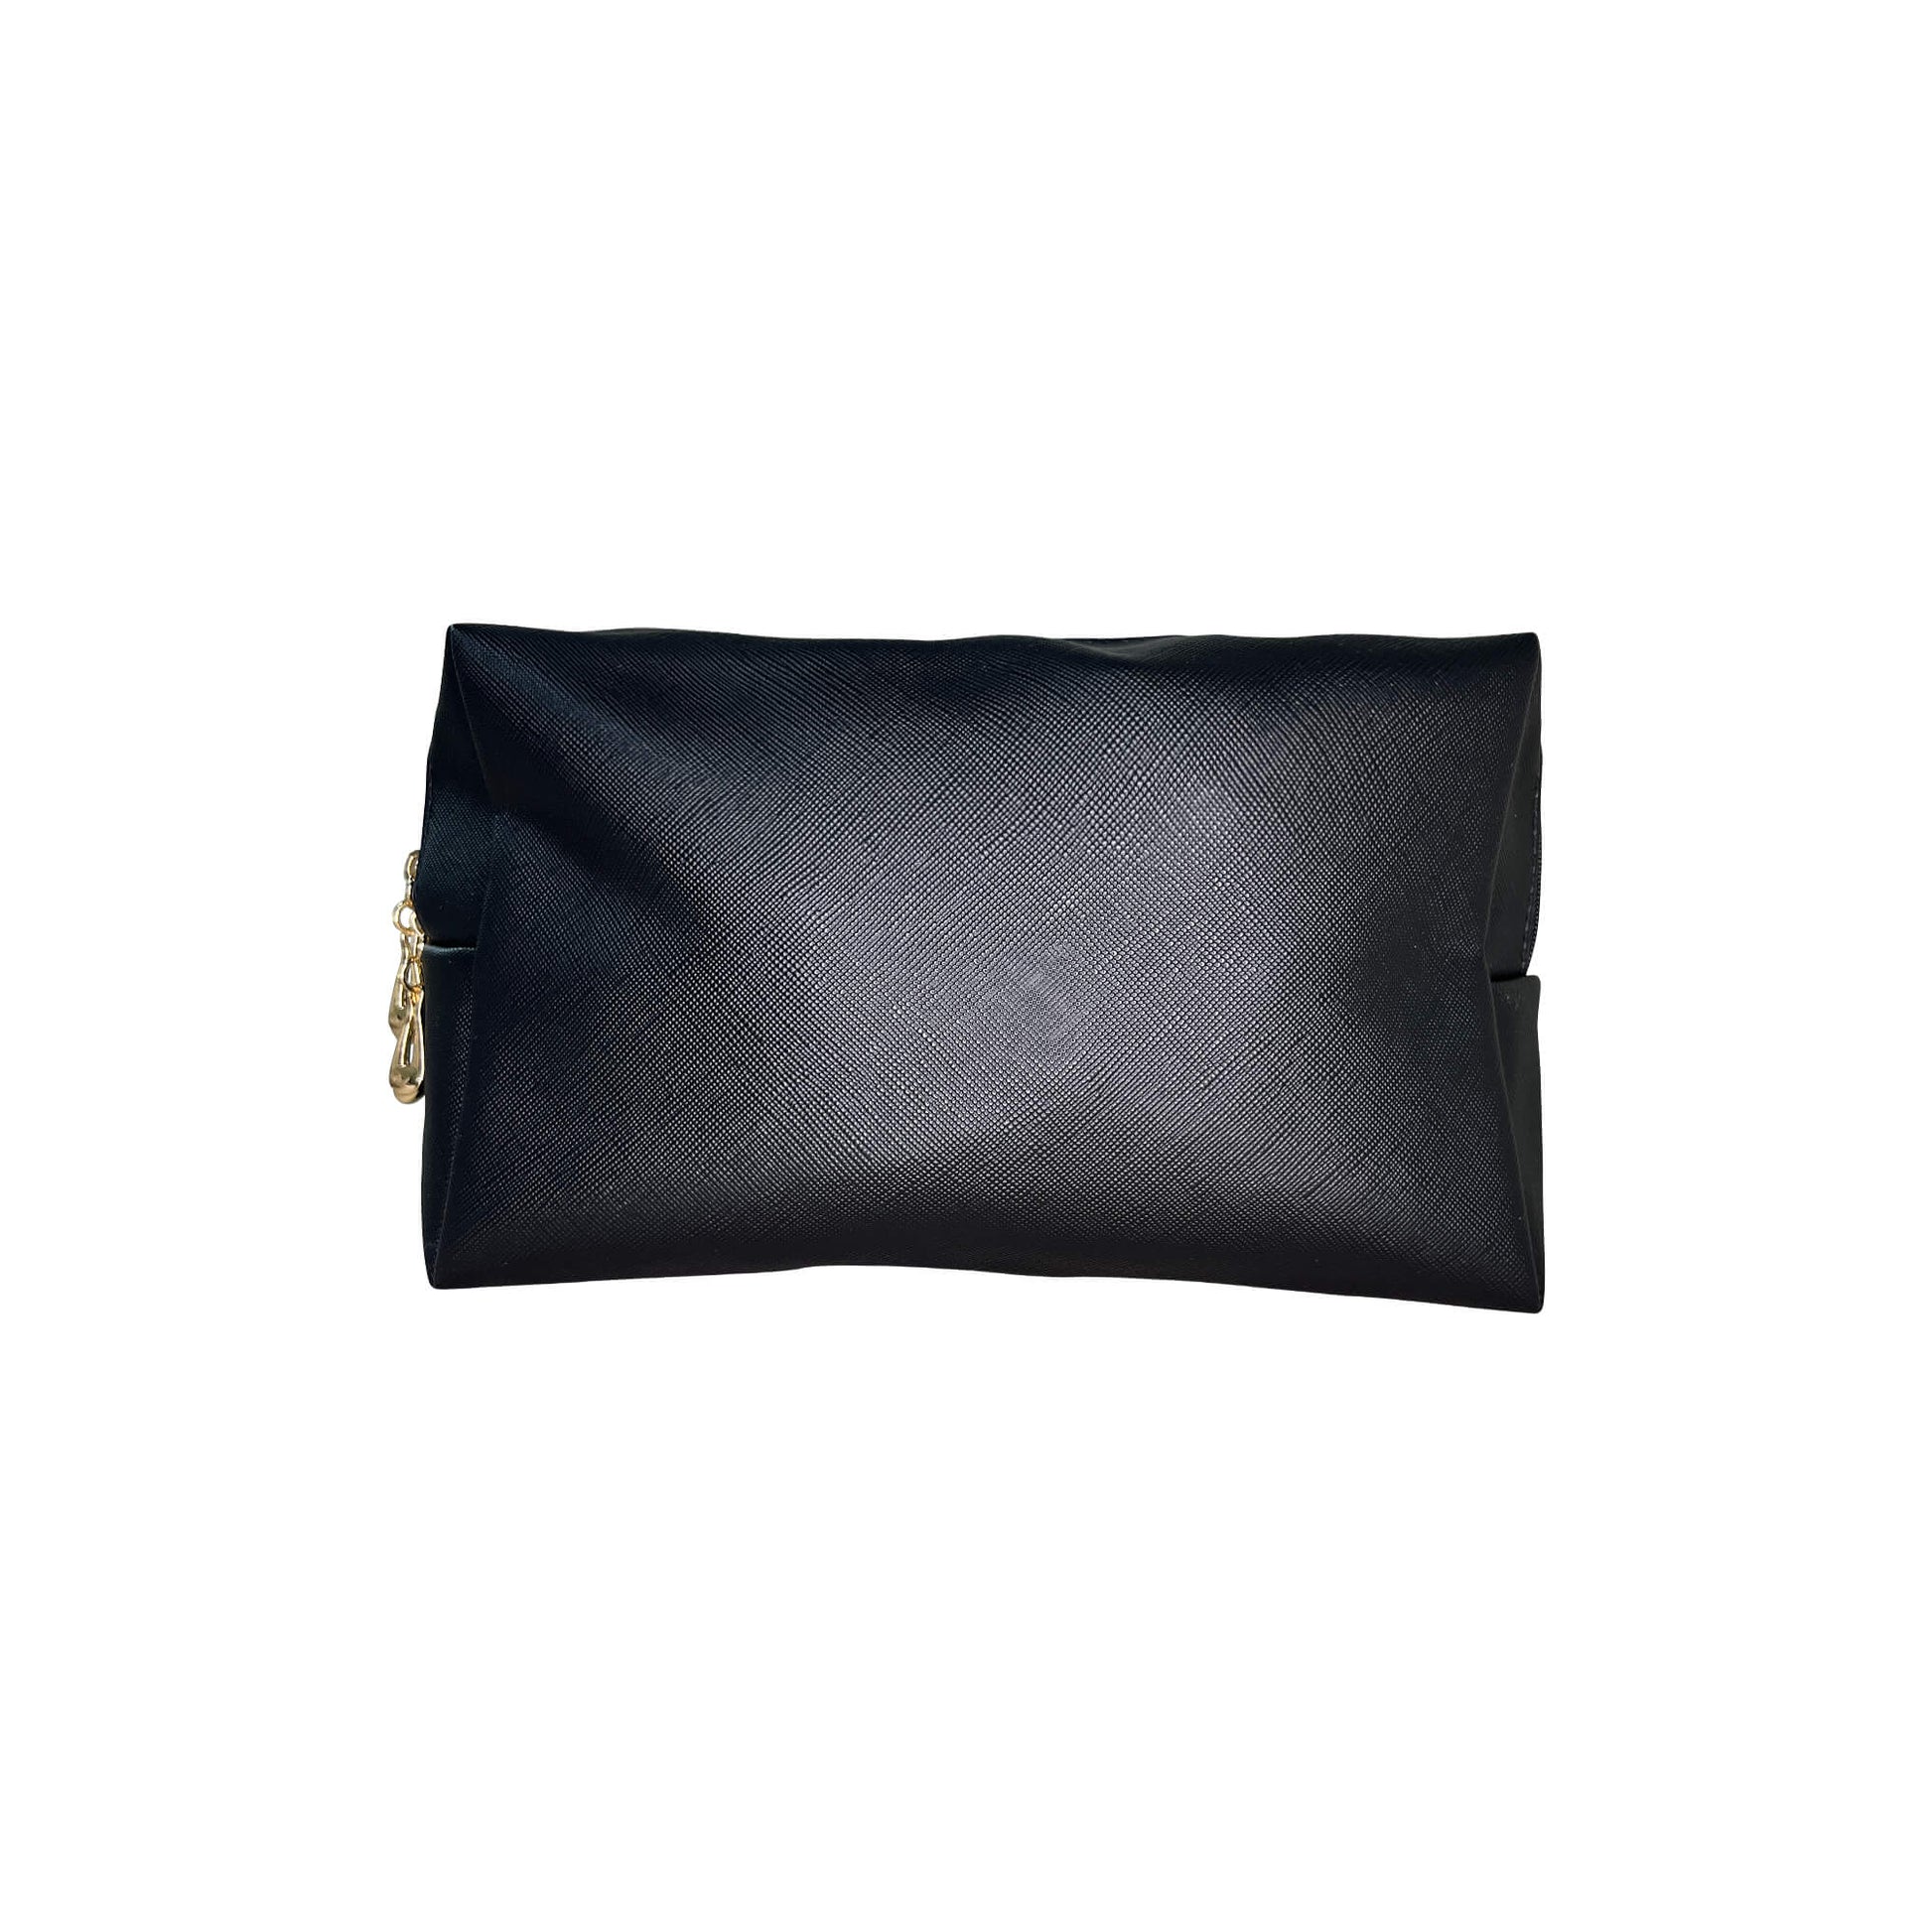 Need a bigger makeup bag for extended days and traveling? The Cruisin Organics Everywhere Makeup Bag is ideal. Take it with you on all your trips, featuring a versatile and compact structure. Its waterproof outer layer and sleek black appearance make it perfect for days spent by the pool.